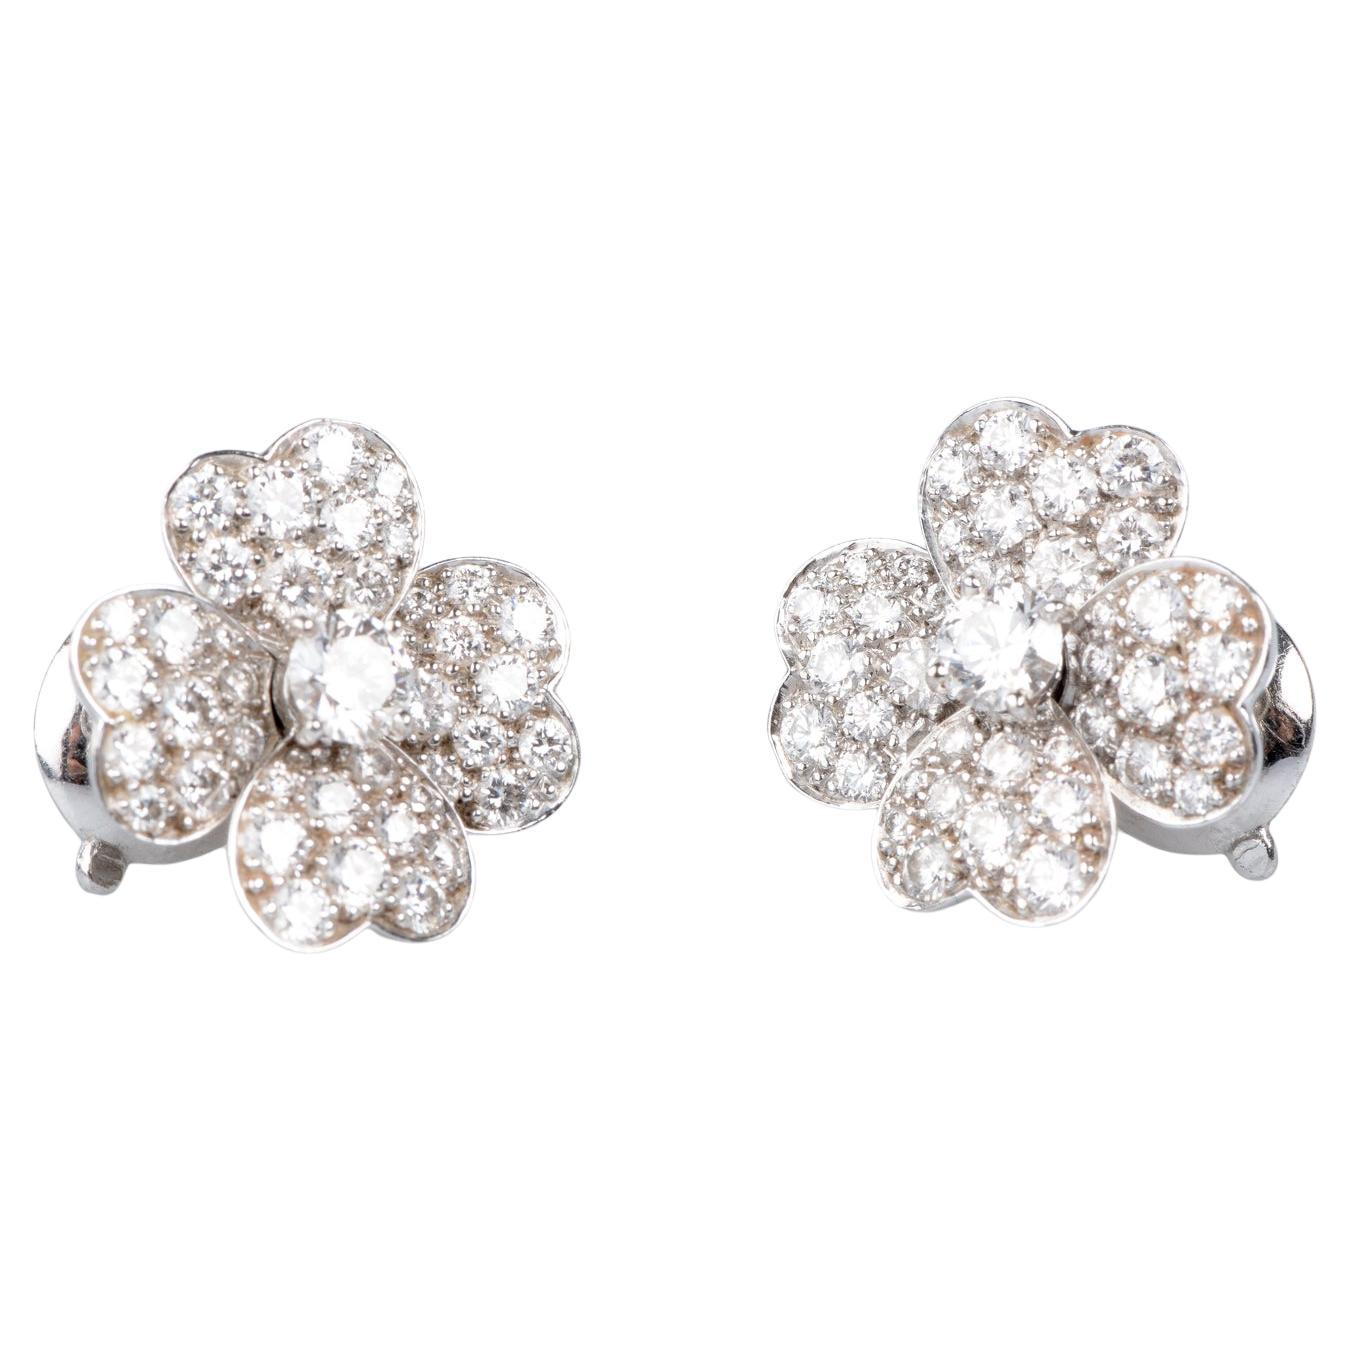 "Cosmos" earrings by Van Cleef & Arpels in gold and diamonds For Sale